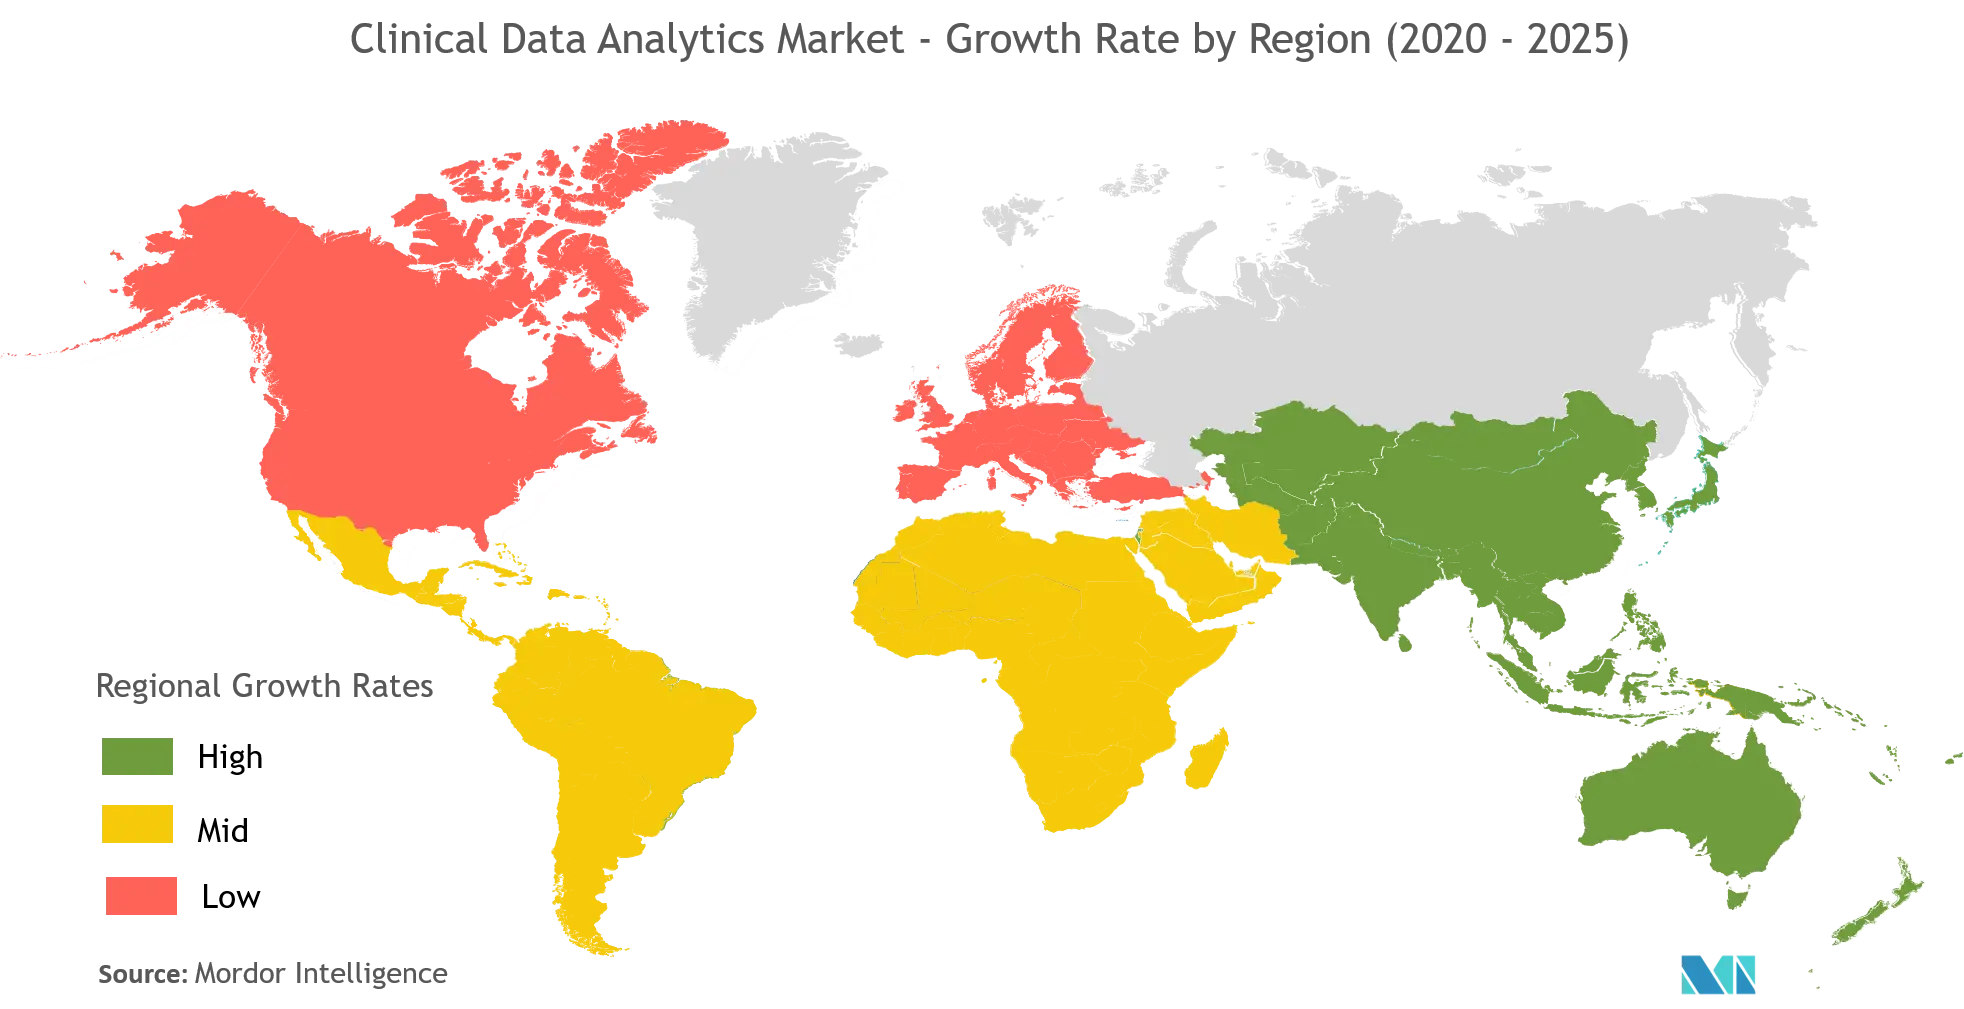 Clinical Data Analytics Market - Growth Rate by Region (2020 - 2025)